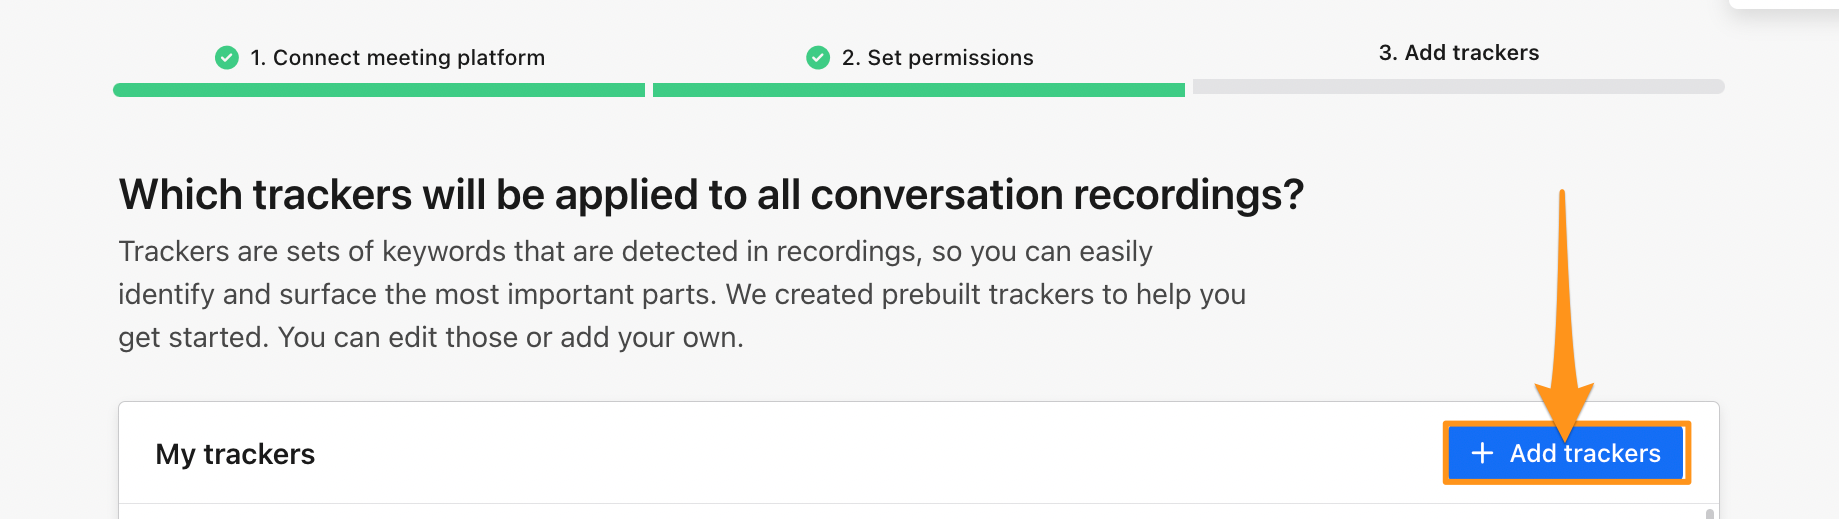 Add trackers button